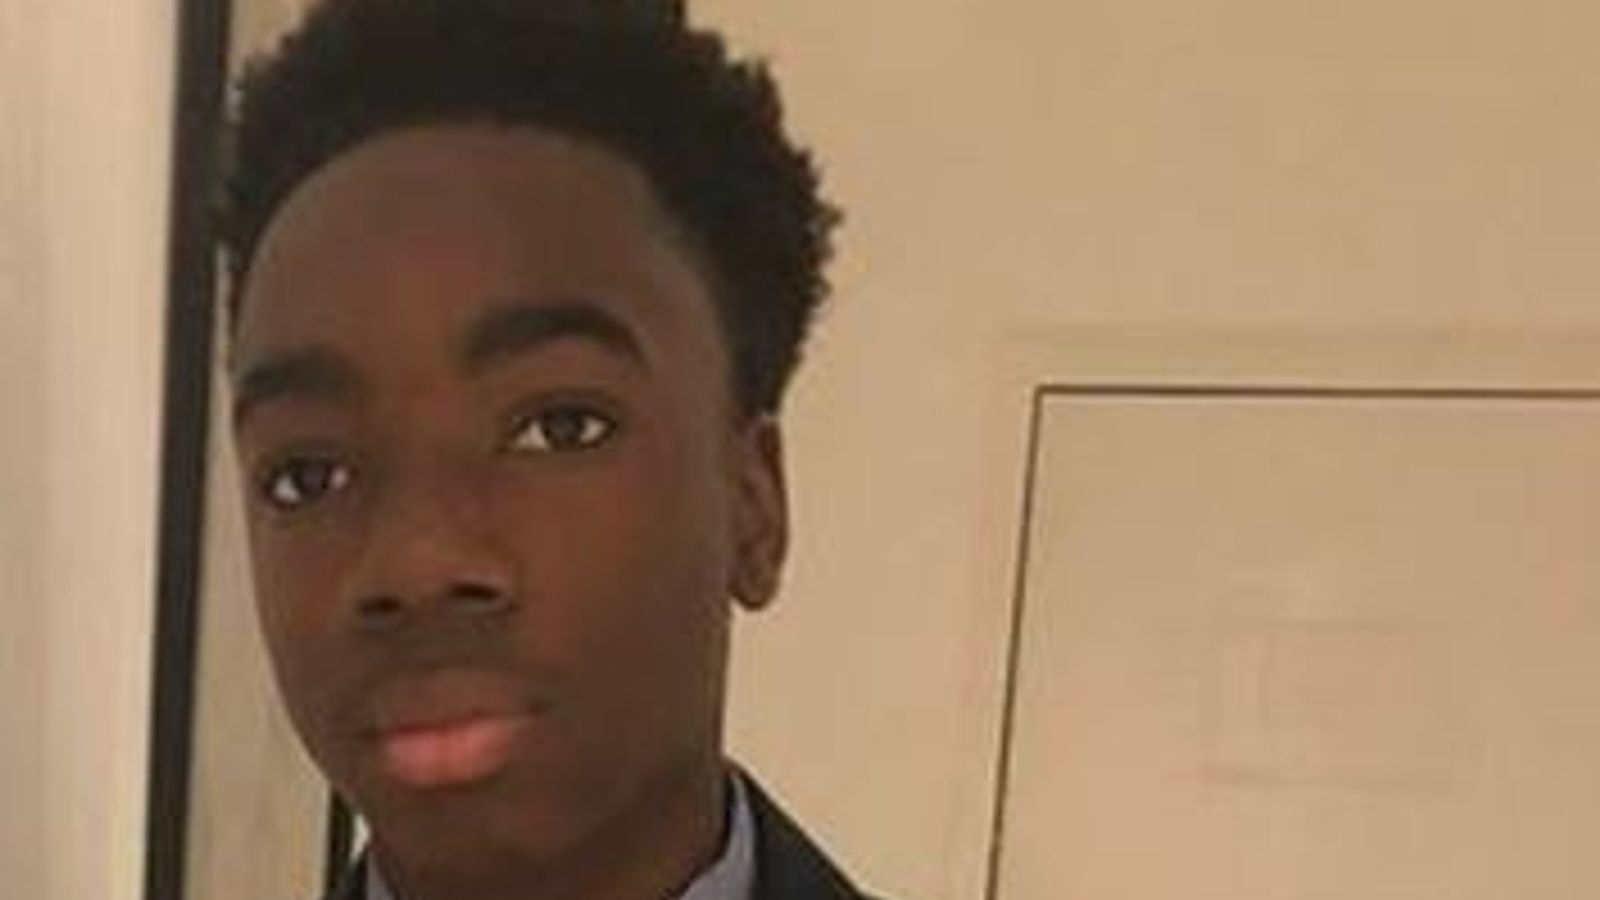 Richard Okorogheye’s body was found more than a week after his mother raised the alarm